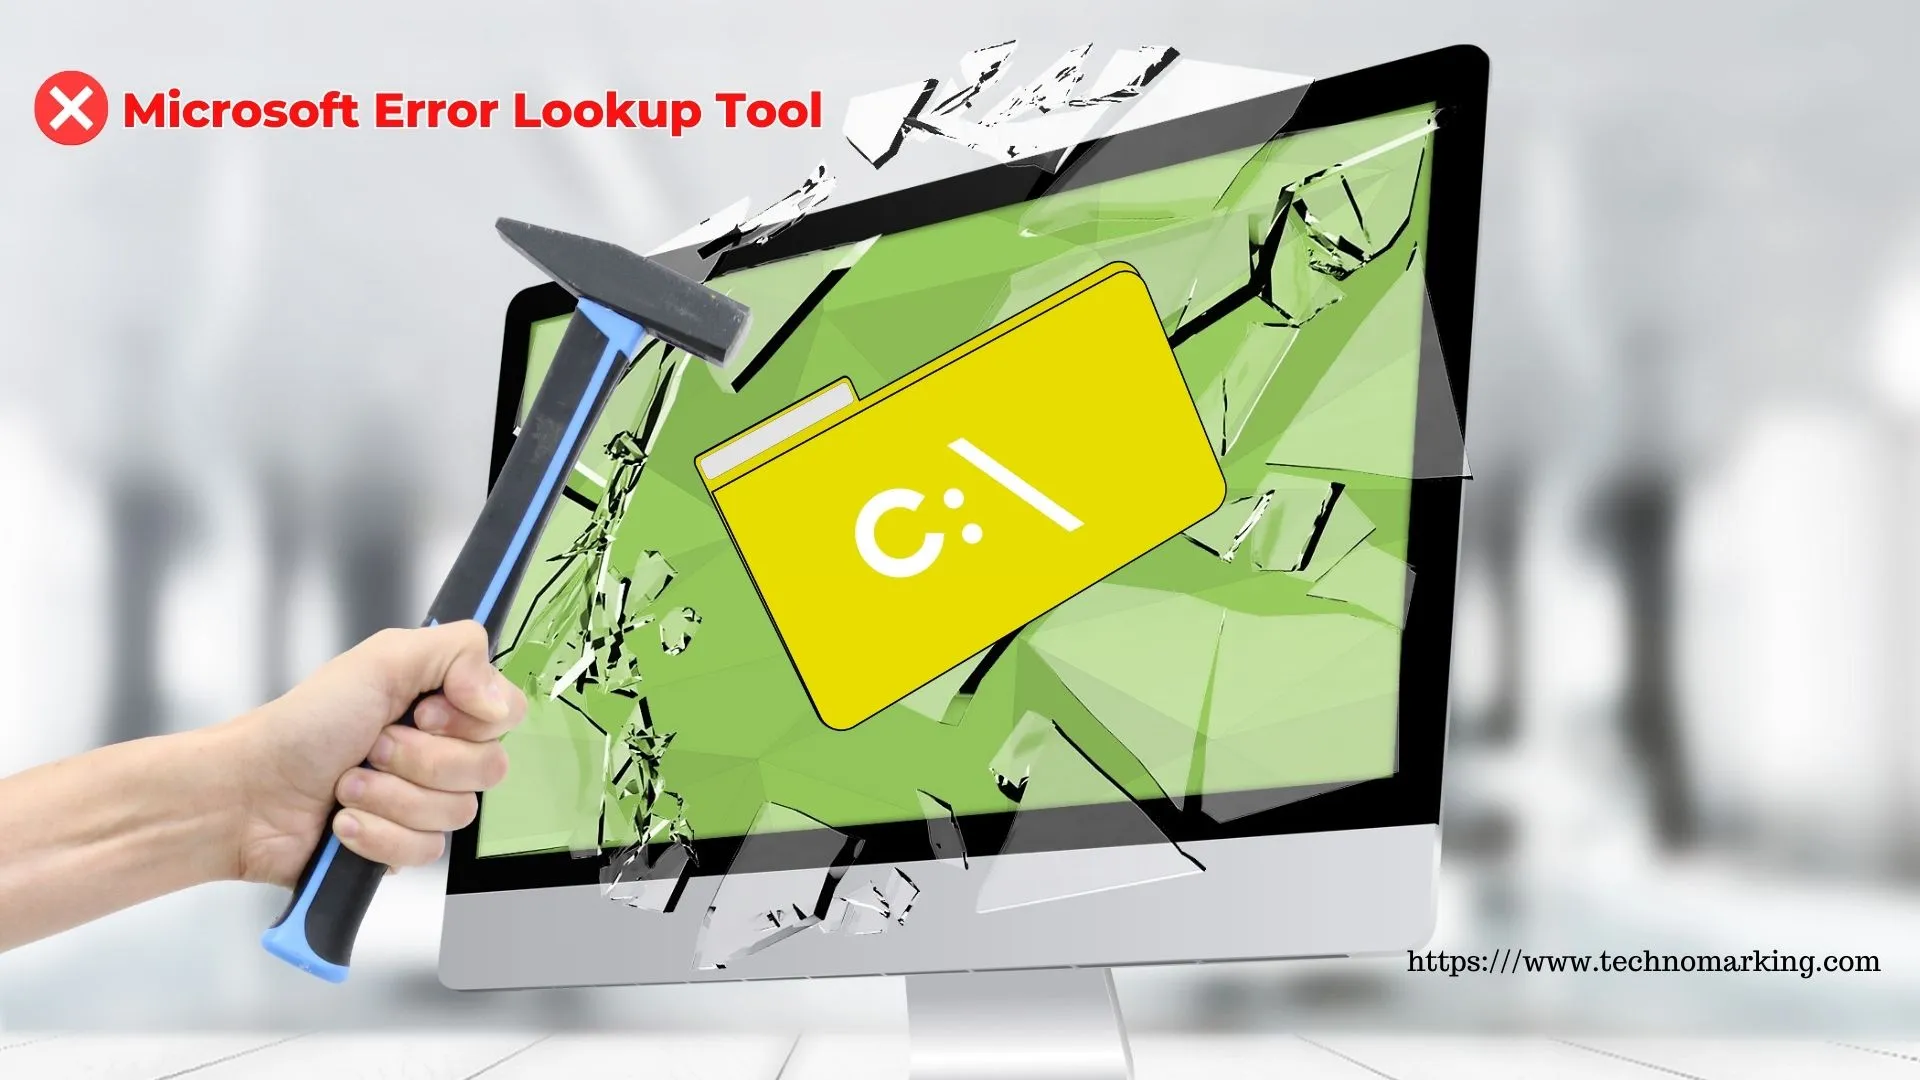 Microsoft Error Lookup Tool: Guides to Troubleshooting Windows Errors